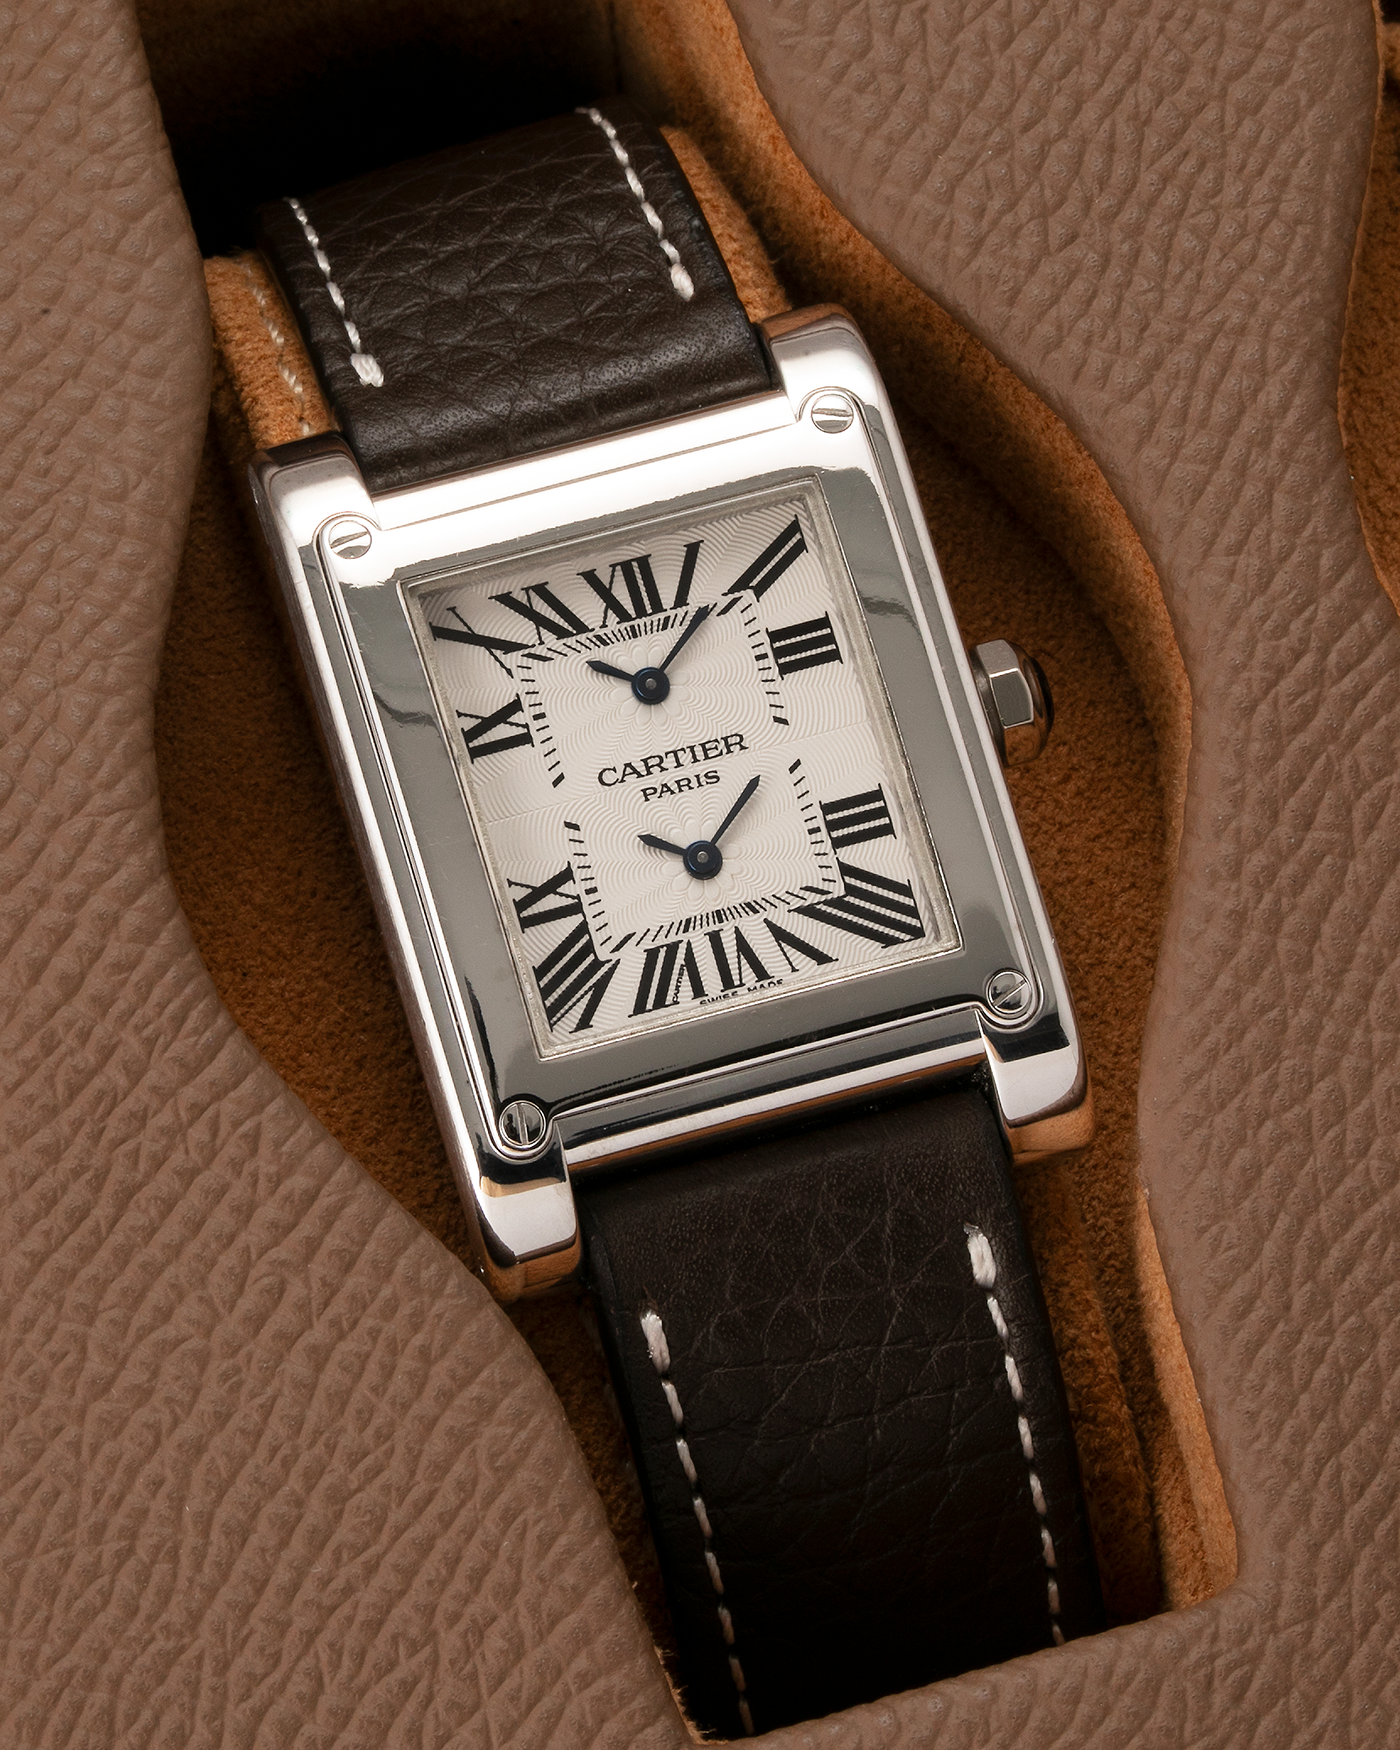 Brand: Cartier Year: 2000s Model: Tank à Vis Dual Time Reference: 2552 Material: 18-carat White Gold Movement: Piaget Ebauche Based Cal. 9901MC, Manual-Winding Case Diameter: 28mm x 32mm Strap: Subdial Dark Brown Textured Calf Leather Strap with Signed 18-carat White Gold Deployant Clasp